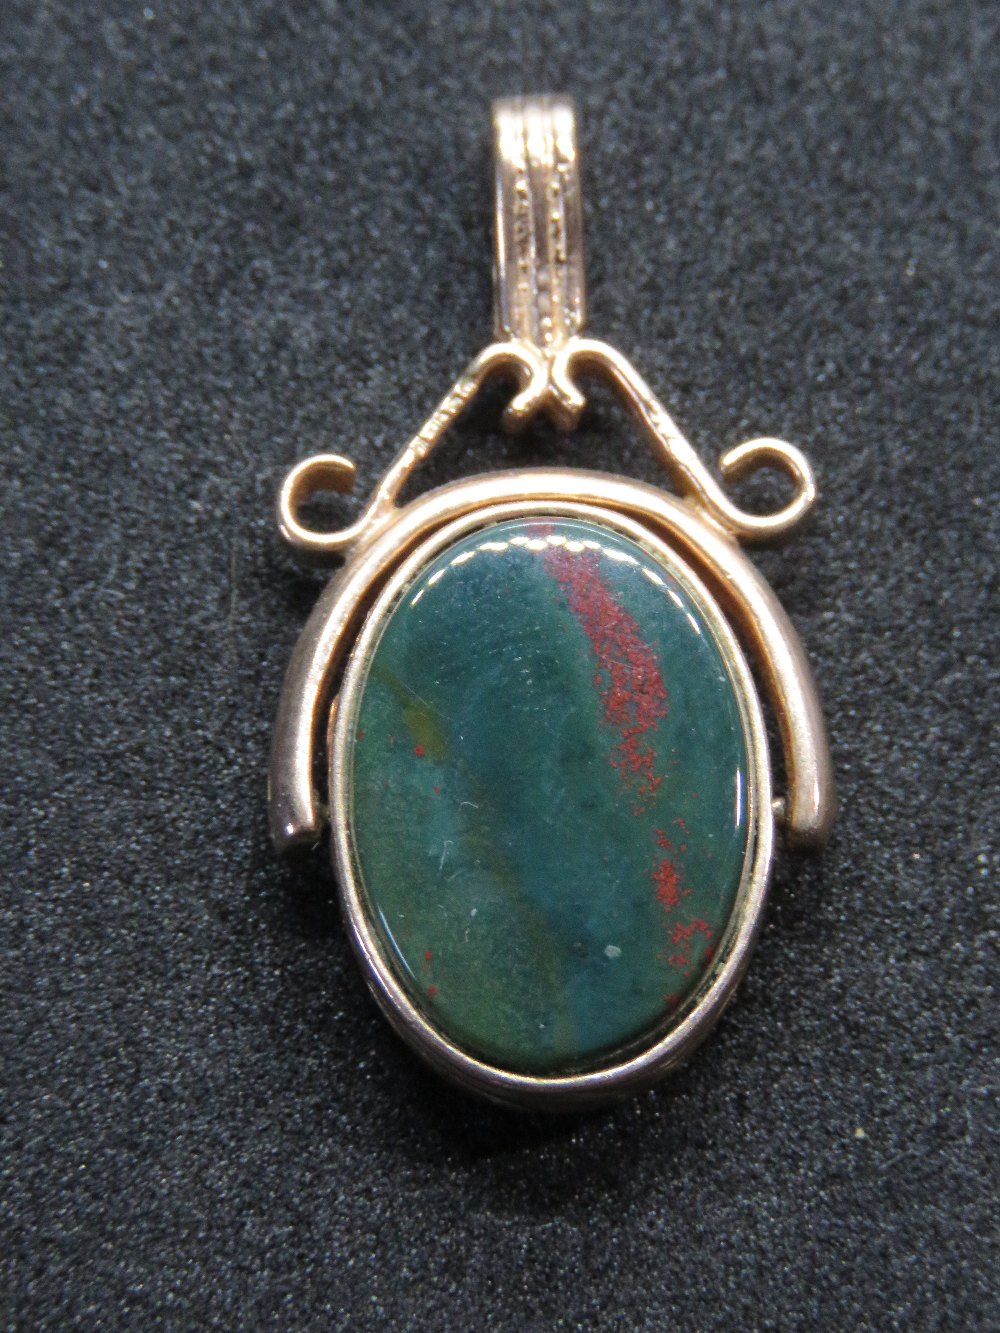 A 9ct gold spinning fob / pendant set with Carnelian and bloodstone cabachons, hallmarked 375.